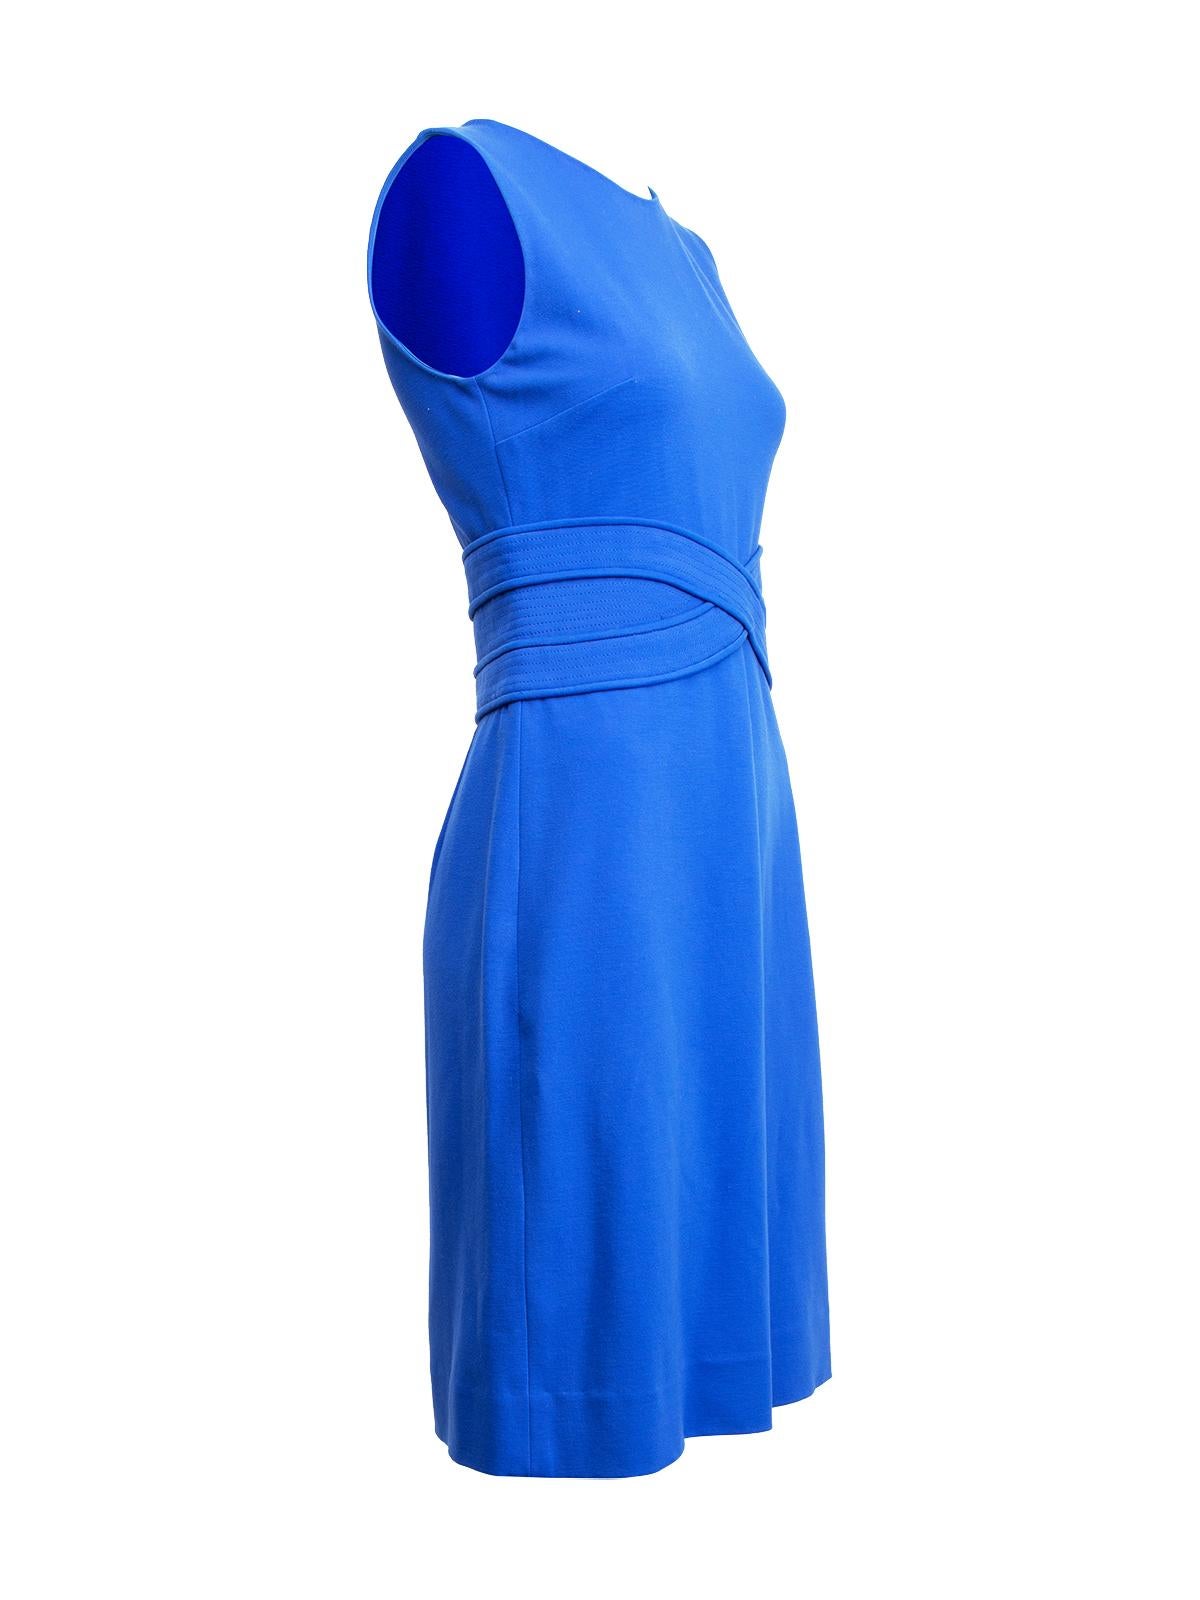 Pre-Loved Diane Von Furstenberg Women's Sleeveless Fit and Flare Dress In Excellent Condition In London, GB